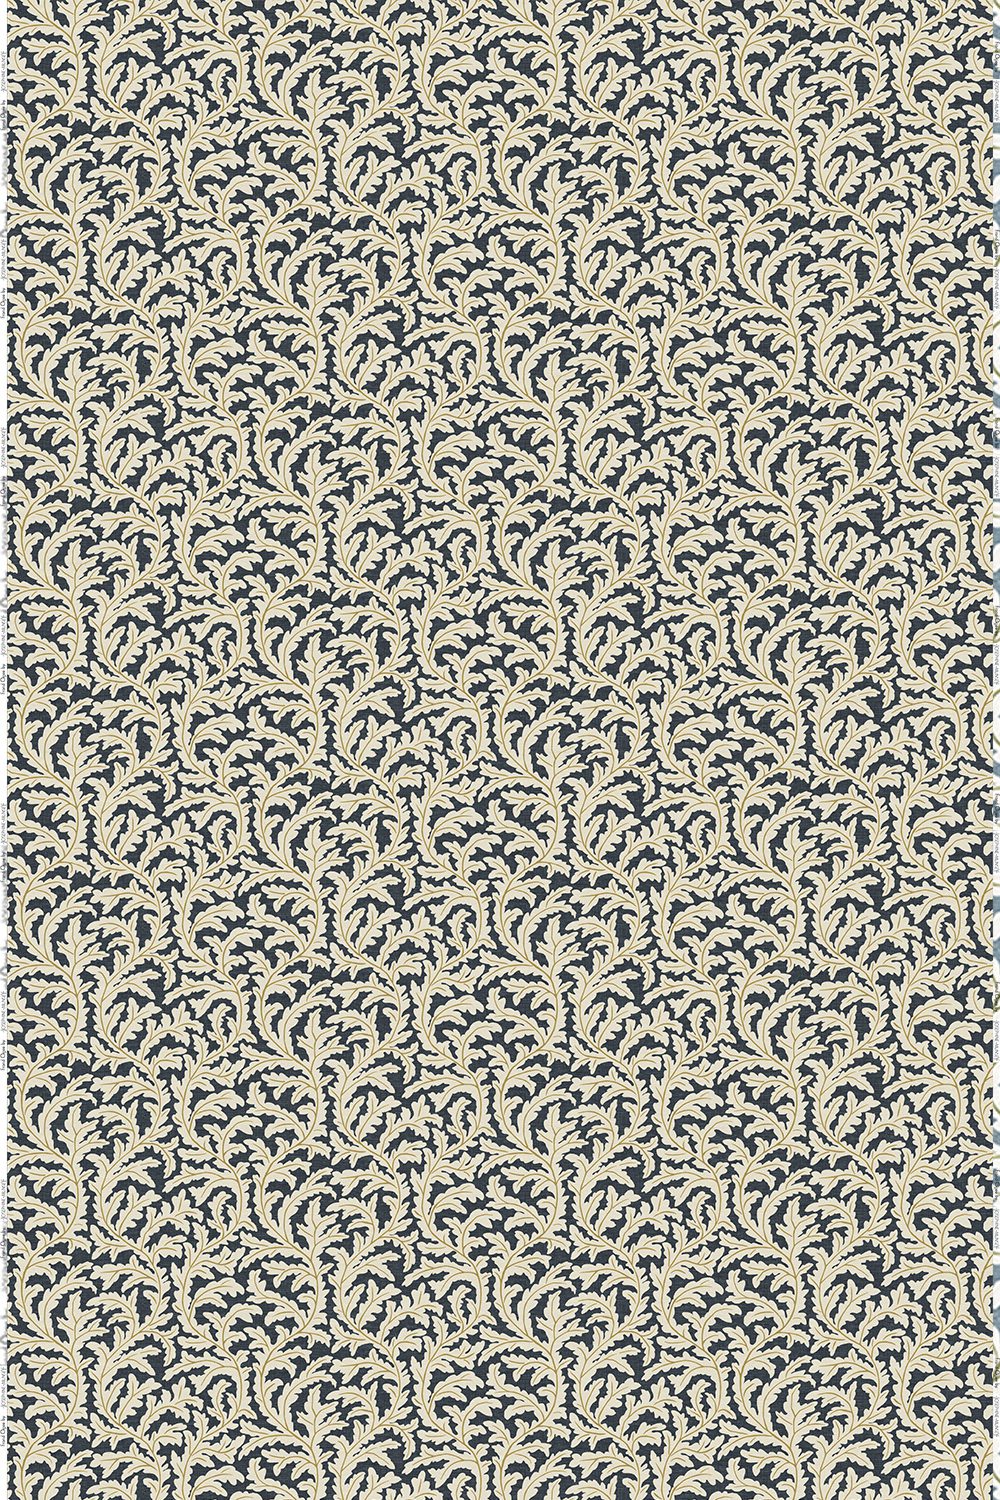 JMF-202511-PLN | Frond Ogee | Navy and Ochre | Pure Linen | Full Repeat